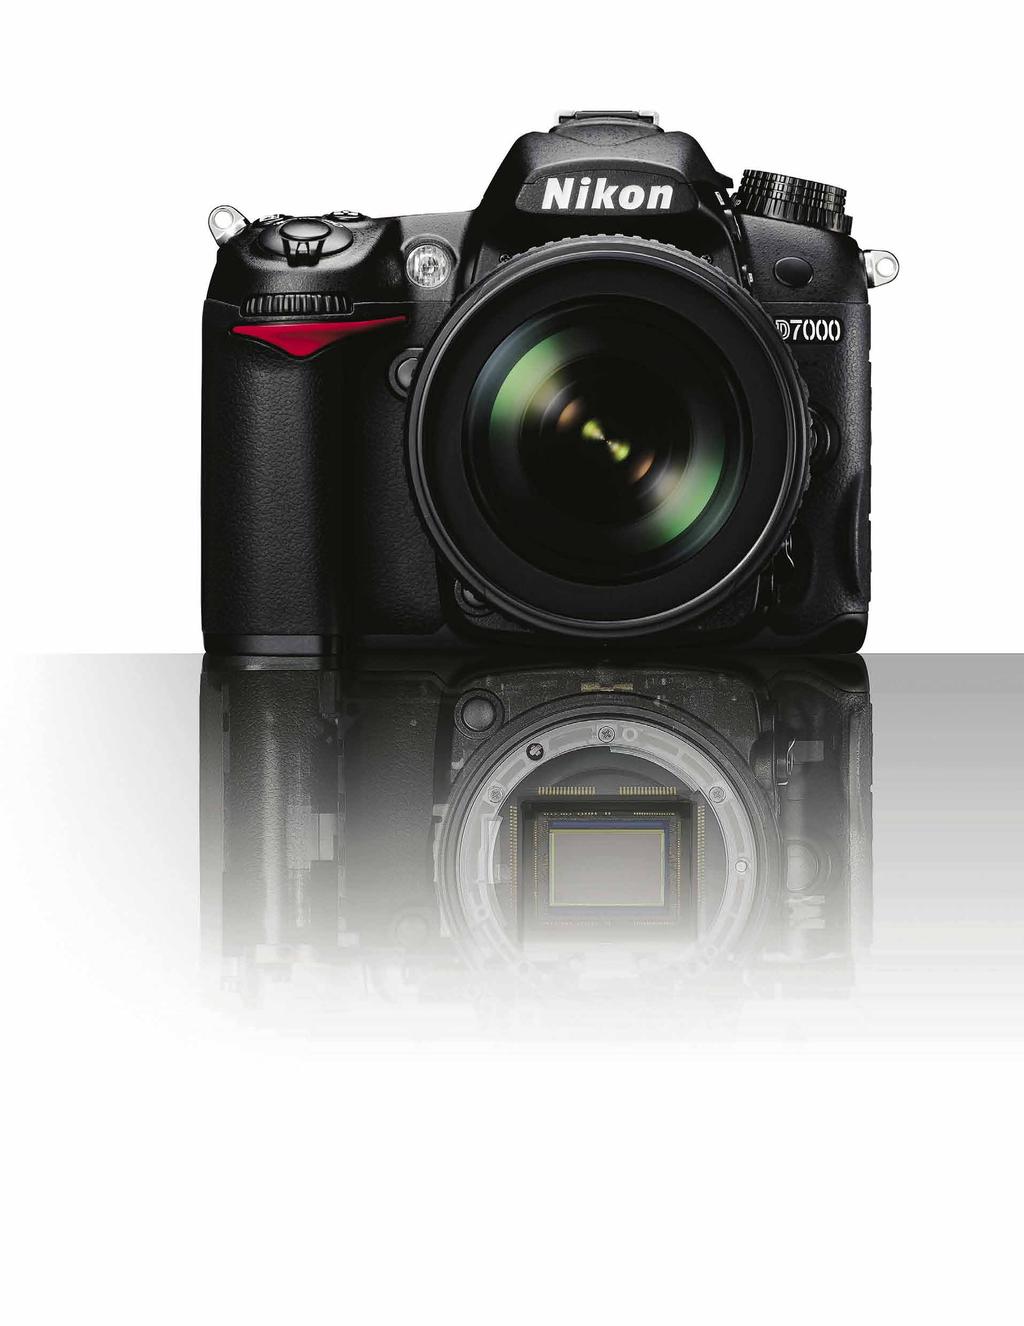 Inspired performance in a Meet the new Nikon D7000, a camera ready to go wherever your photography or cinematography takes you.